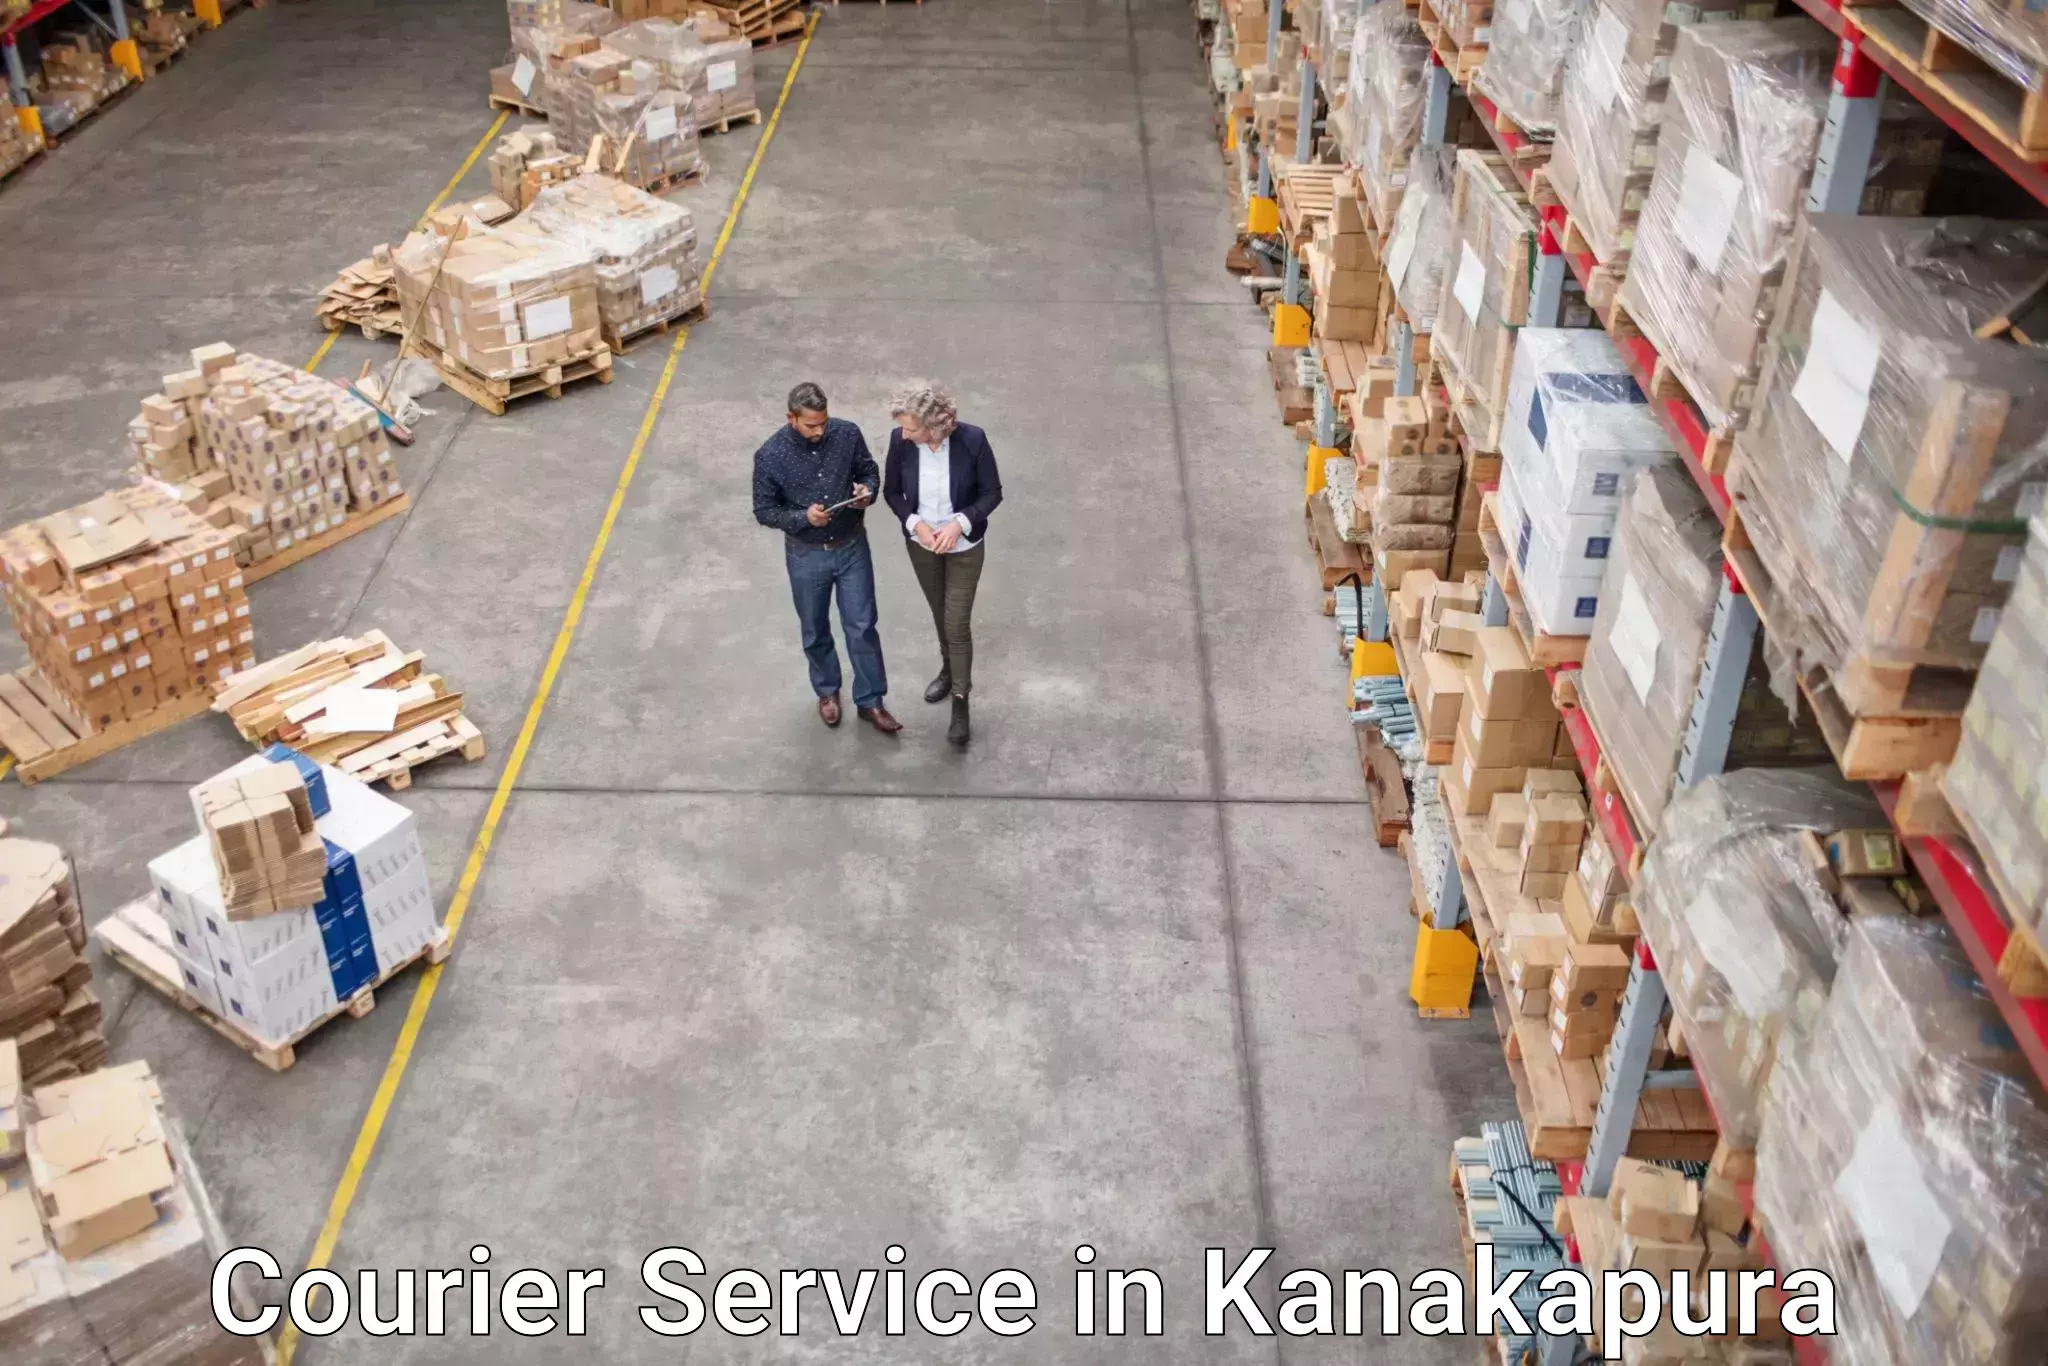 Express package delivery in Kanakapura